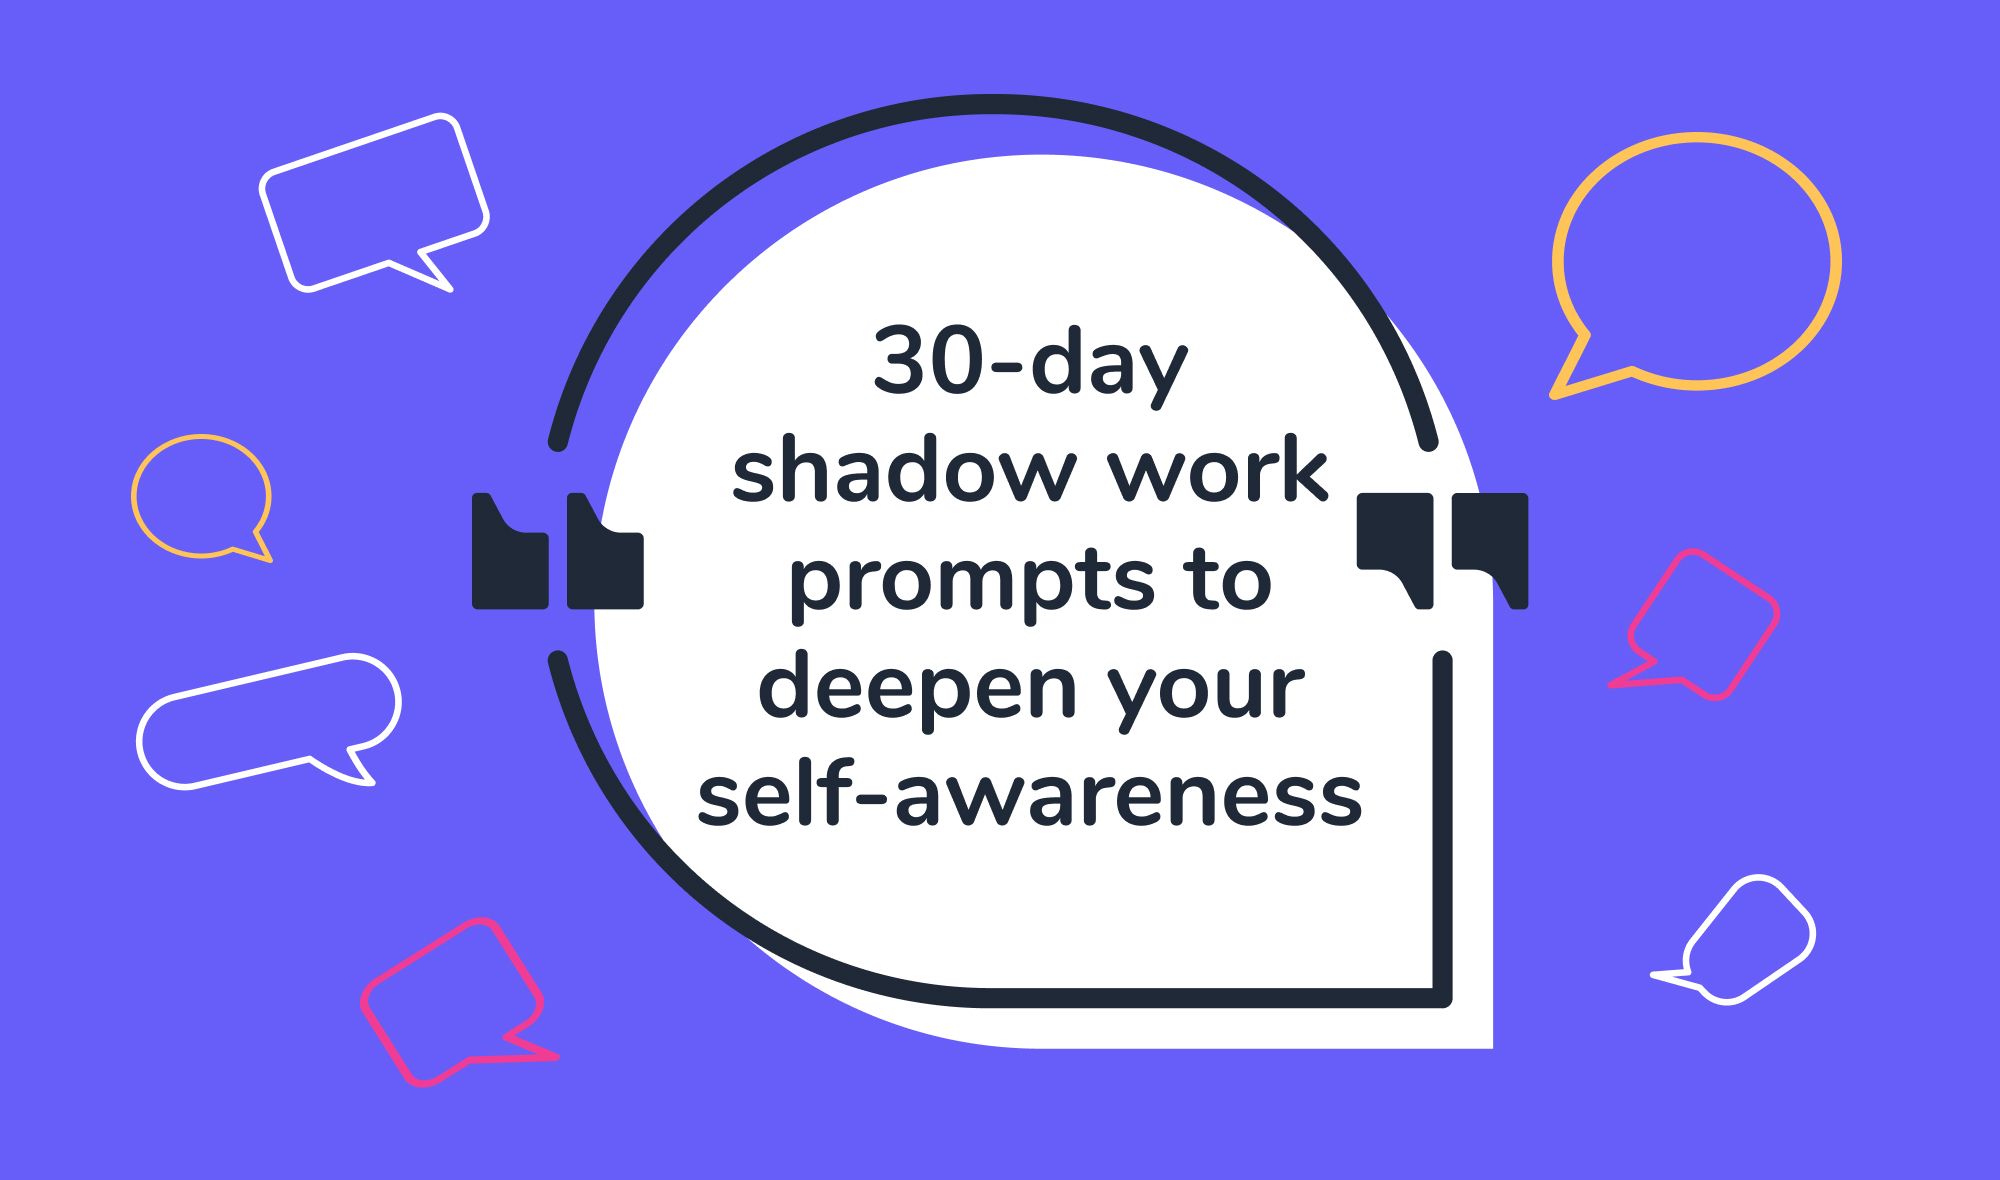 Exploring your shadow self: 30-day shadow work prompts to deepen your self-awareness